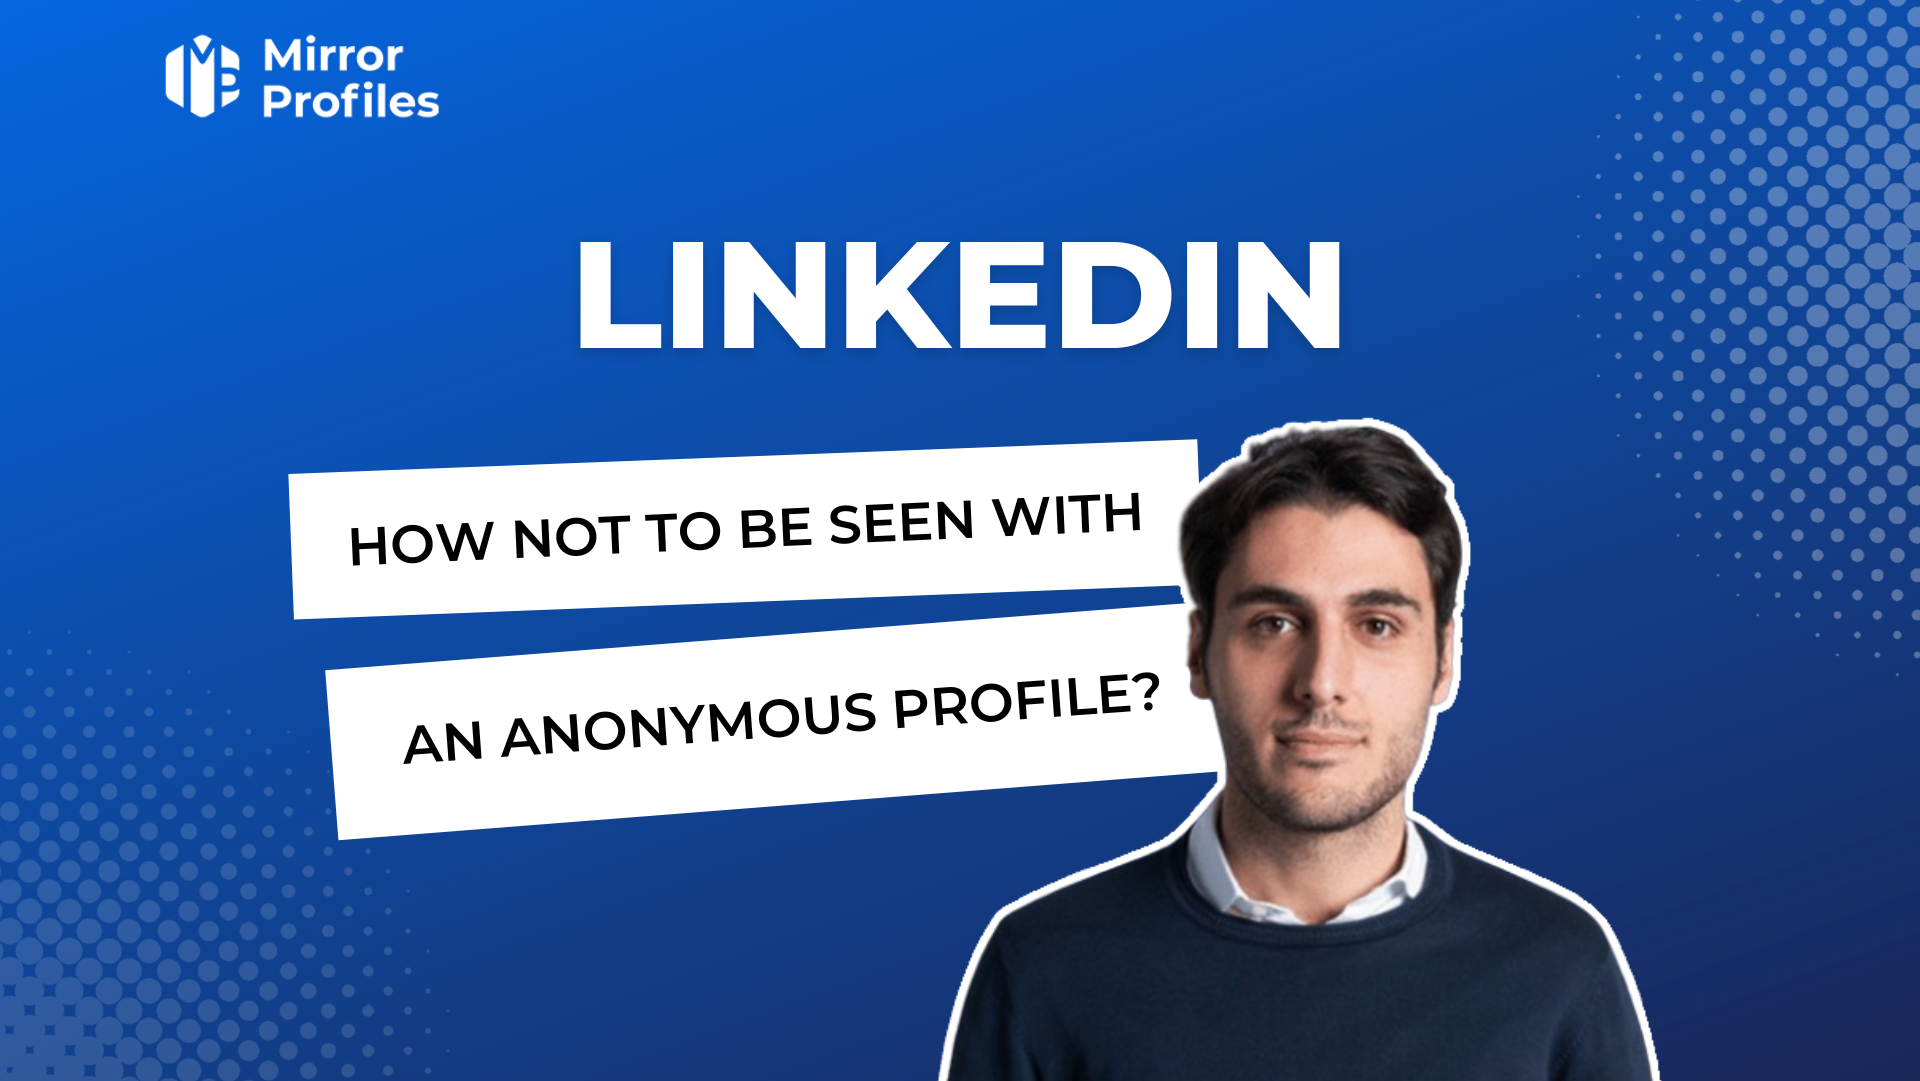 LinkedIn-How not to be seen with an anonymous profile?